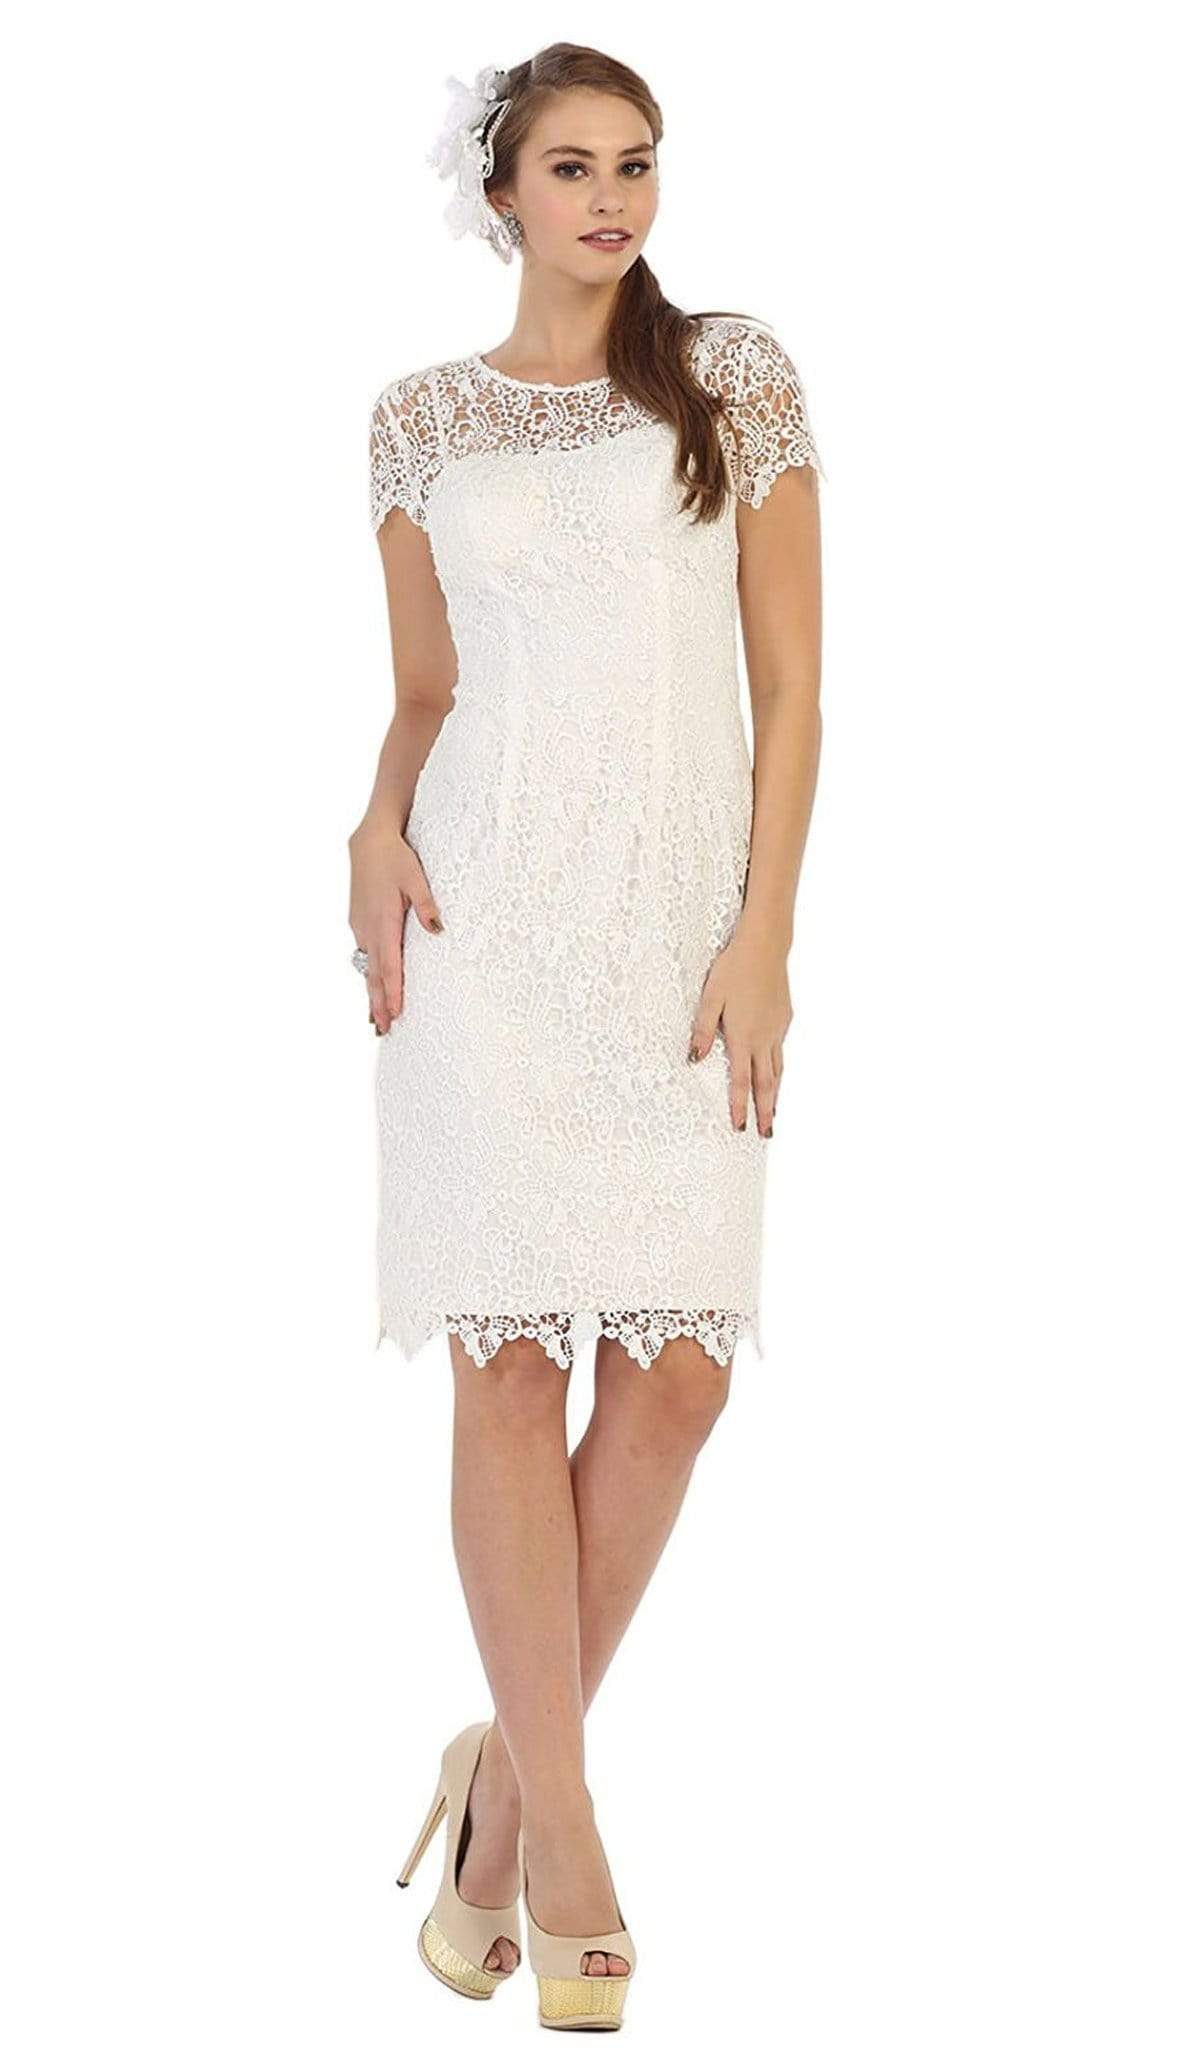 May Queen - Short Sleeve Illusion Lace Sheath Formal Dress Special Occasion Dress M / Ivory